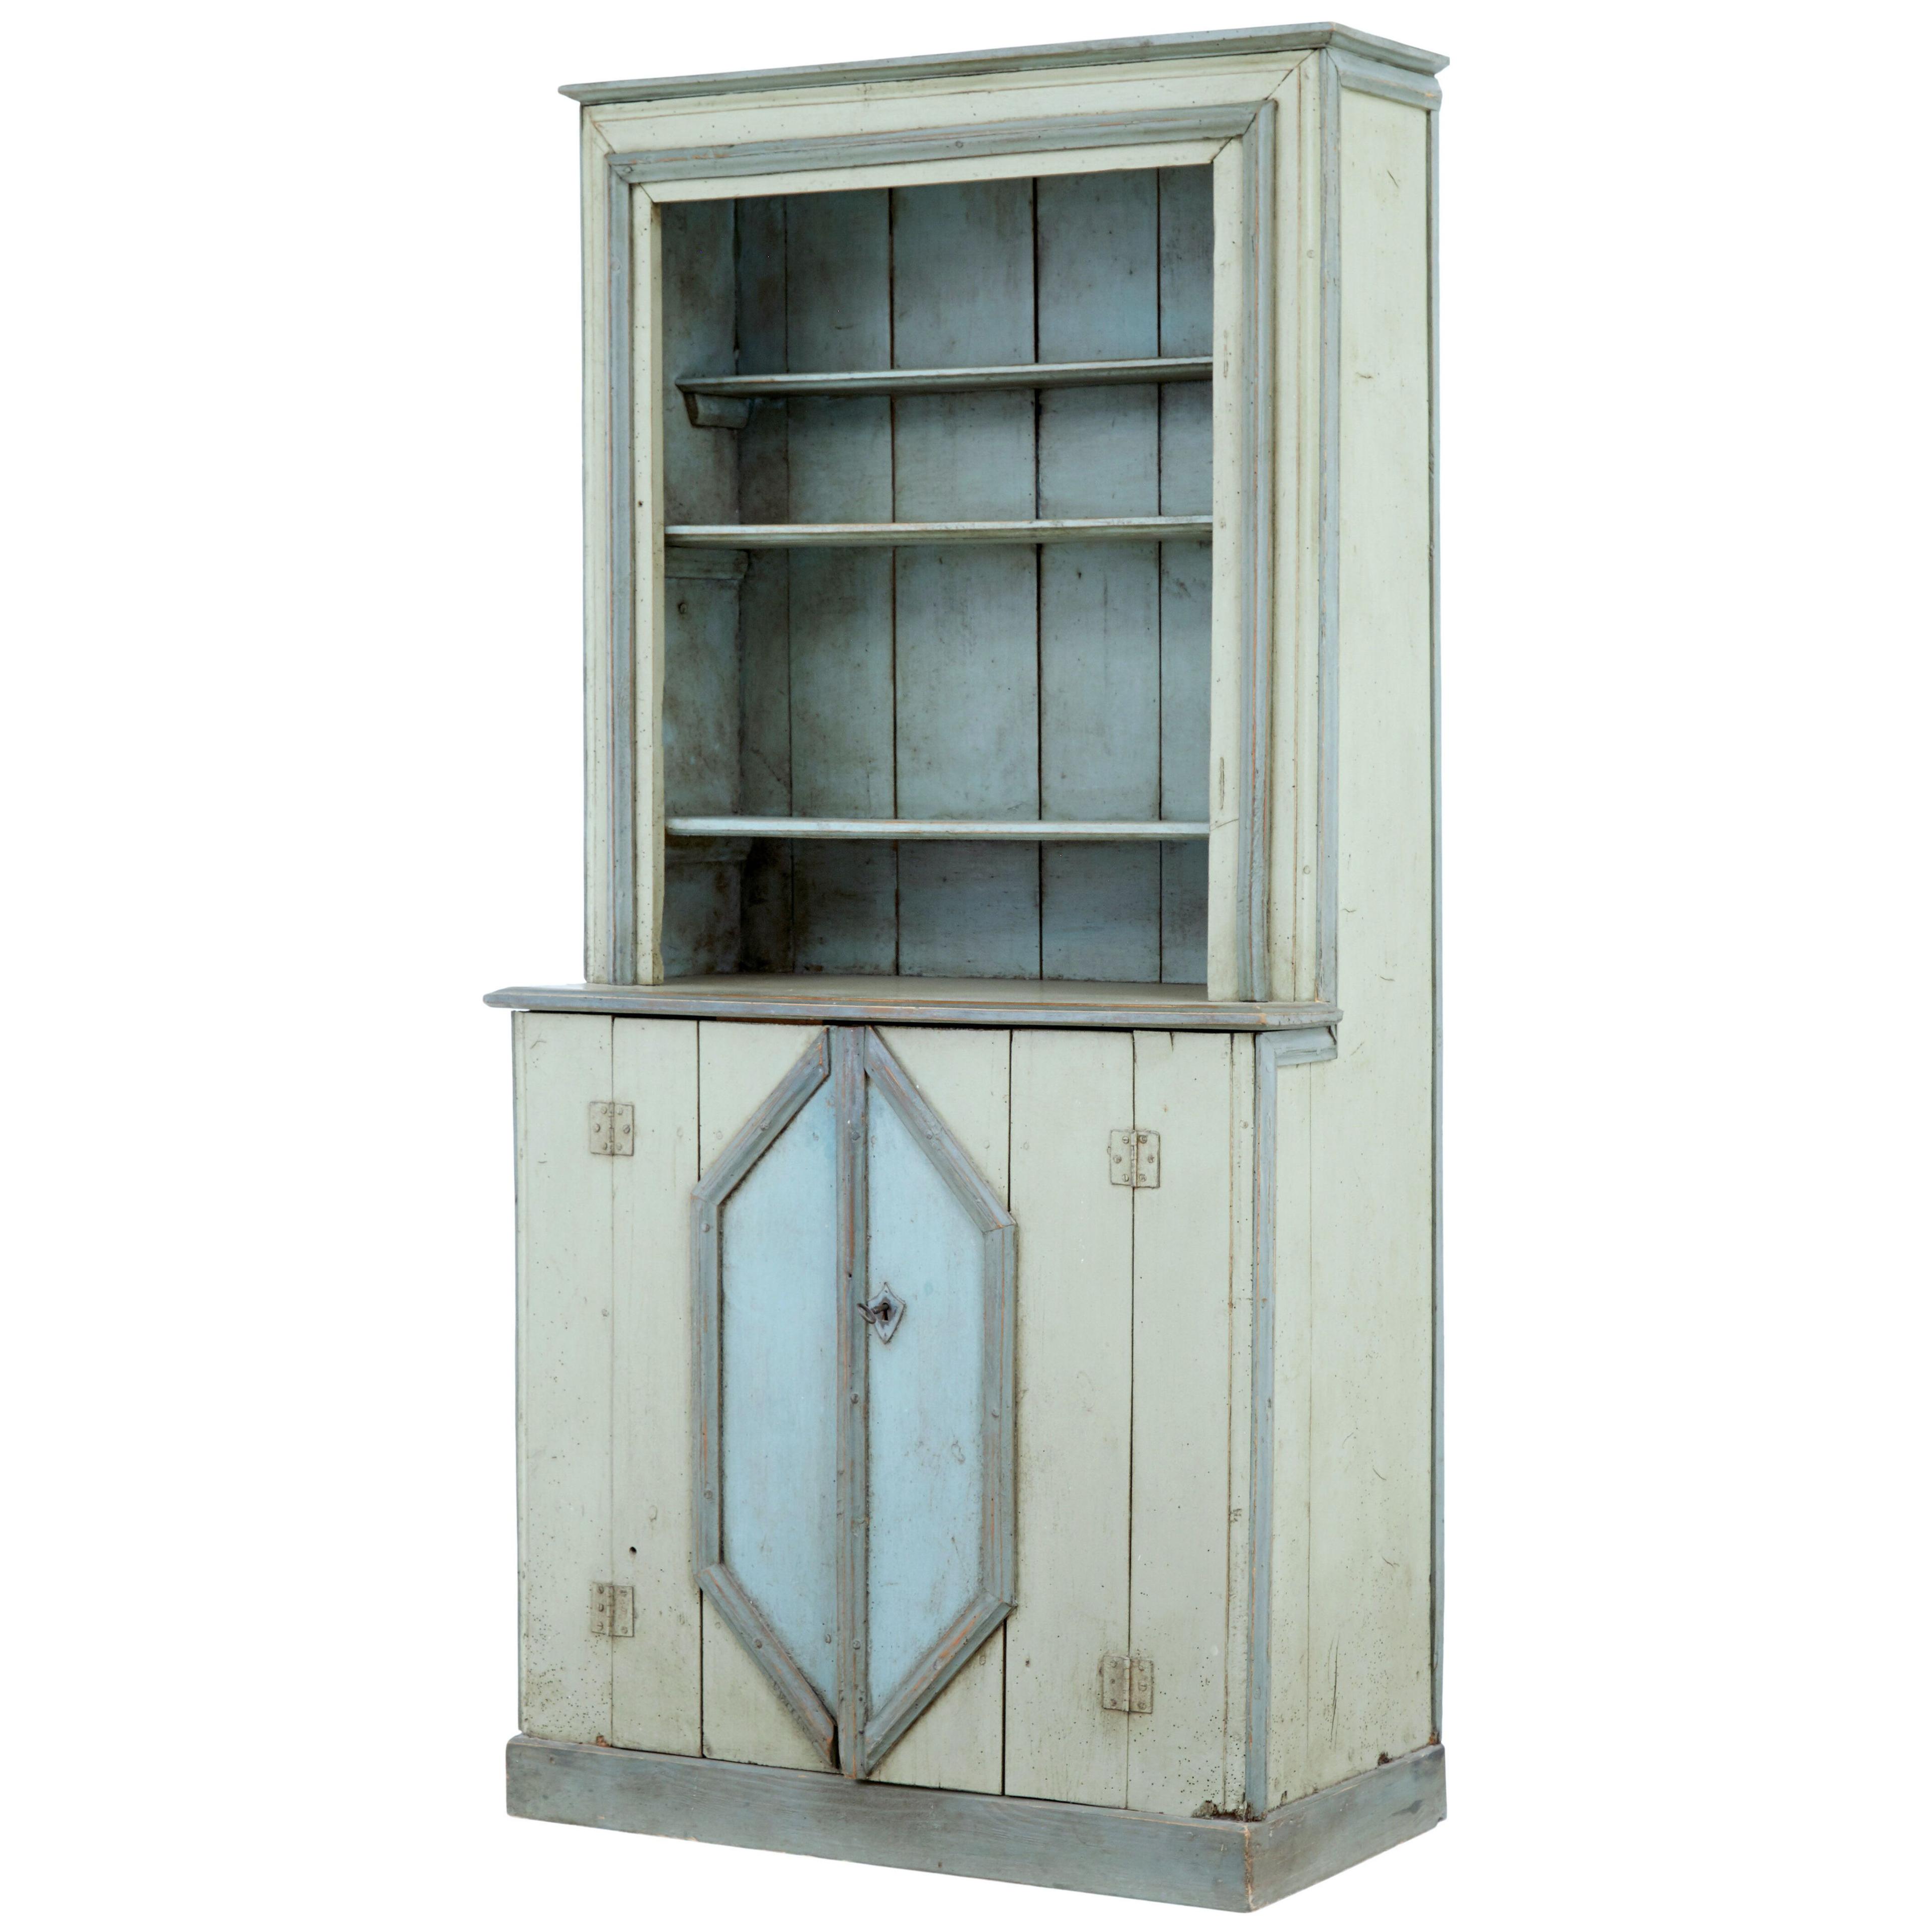 19TH CENTURY PAINTED FRENCH KITCHEN CUPBOARD